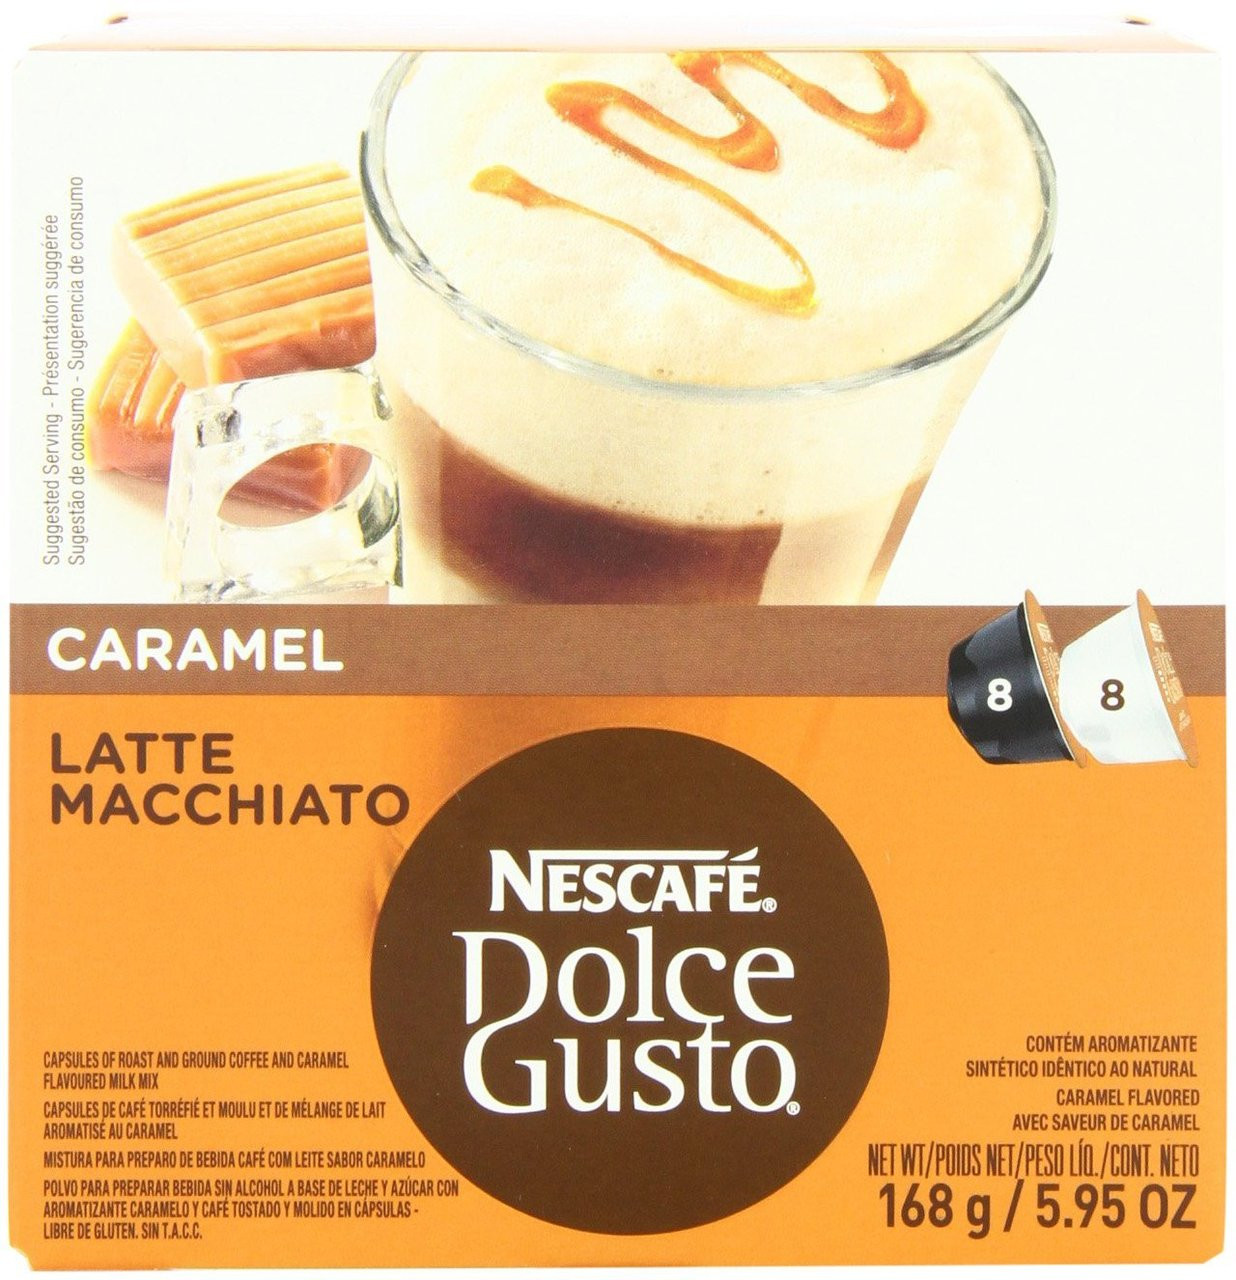 Nescafe Dolce Gusto for Nescafe Dolce Gusto Brewers, Caramel Latte